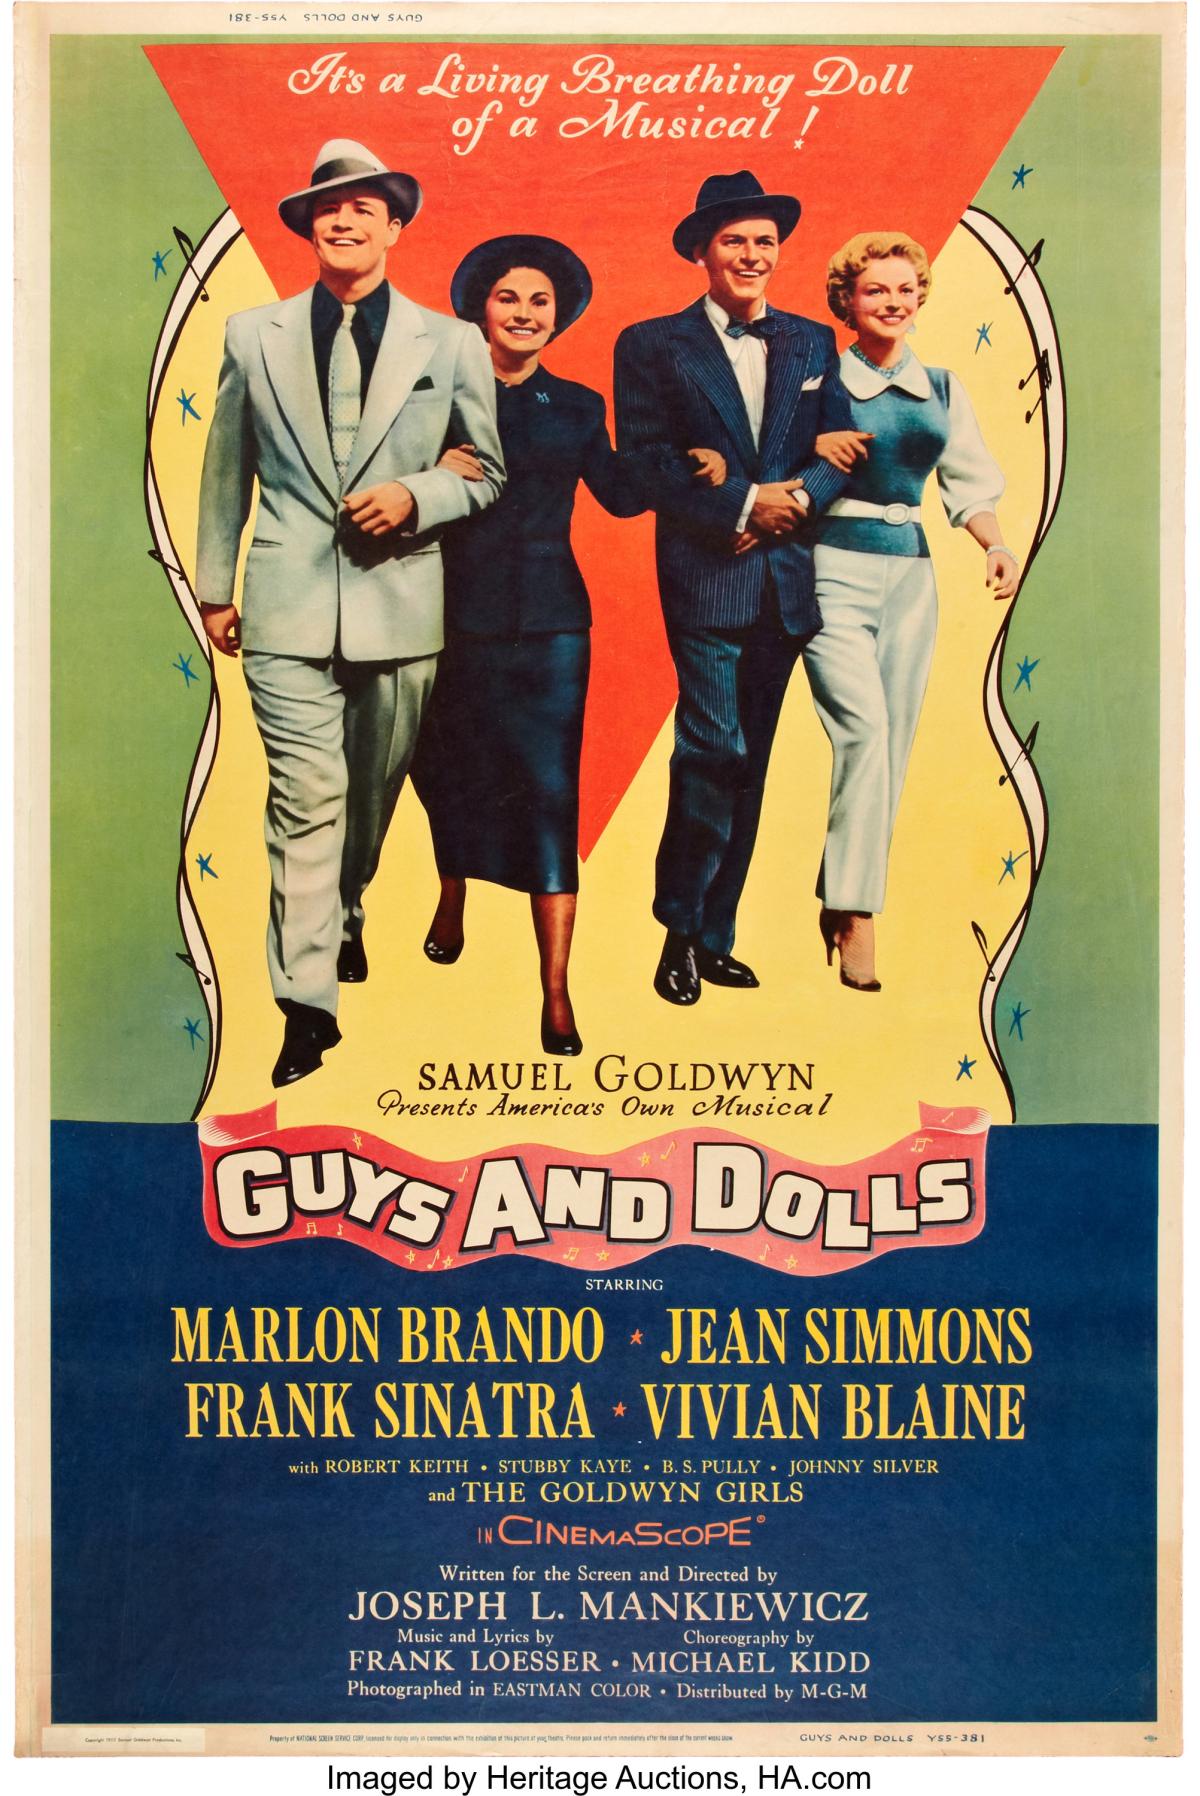 Movie poster for Guys and Dolls with two couples holding hands walking against a multicolor background. 